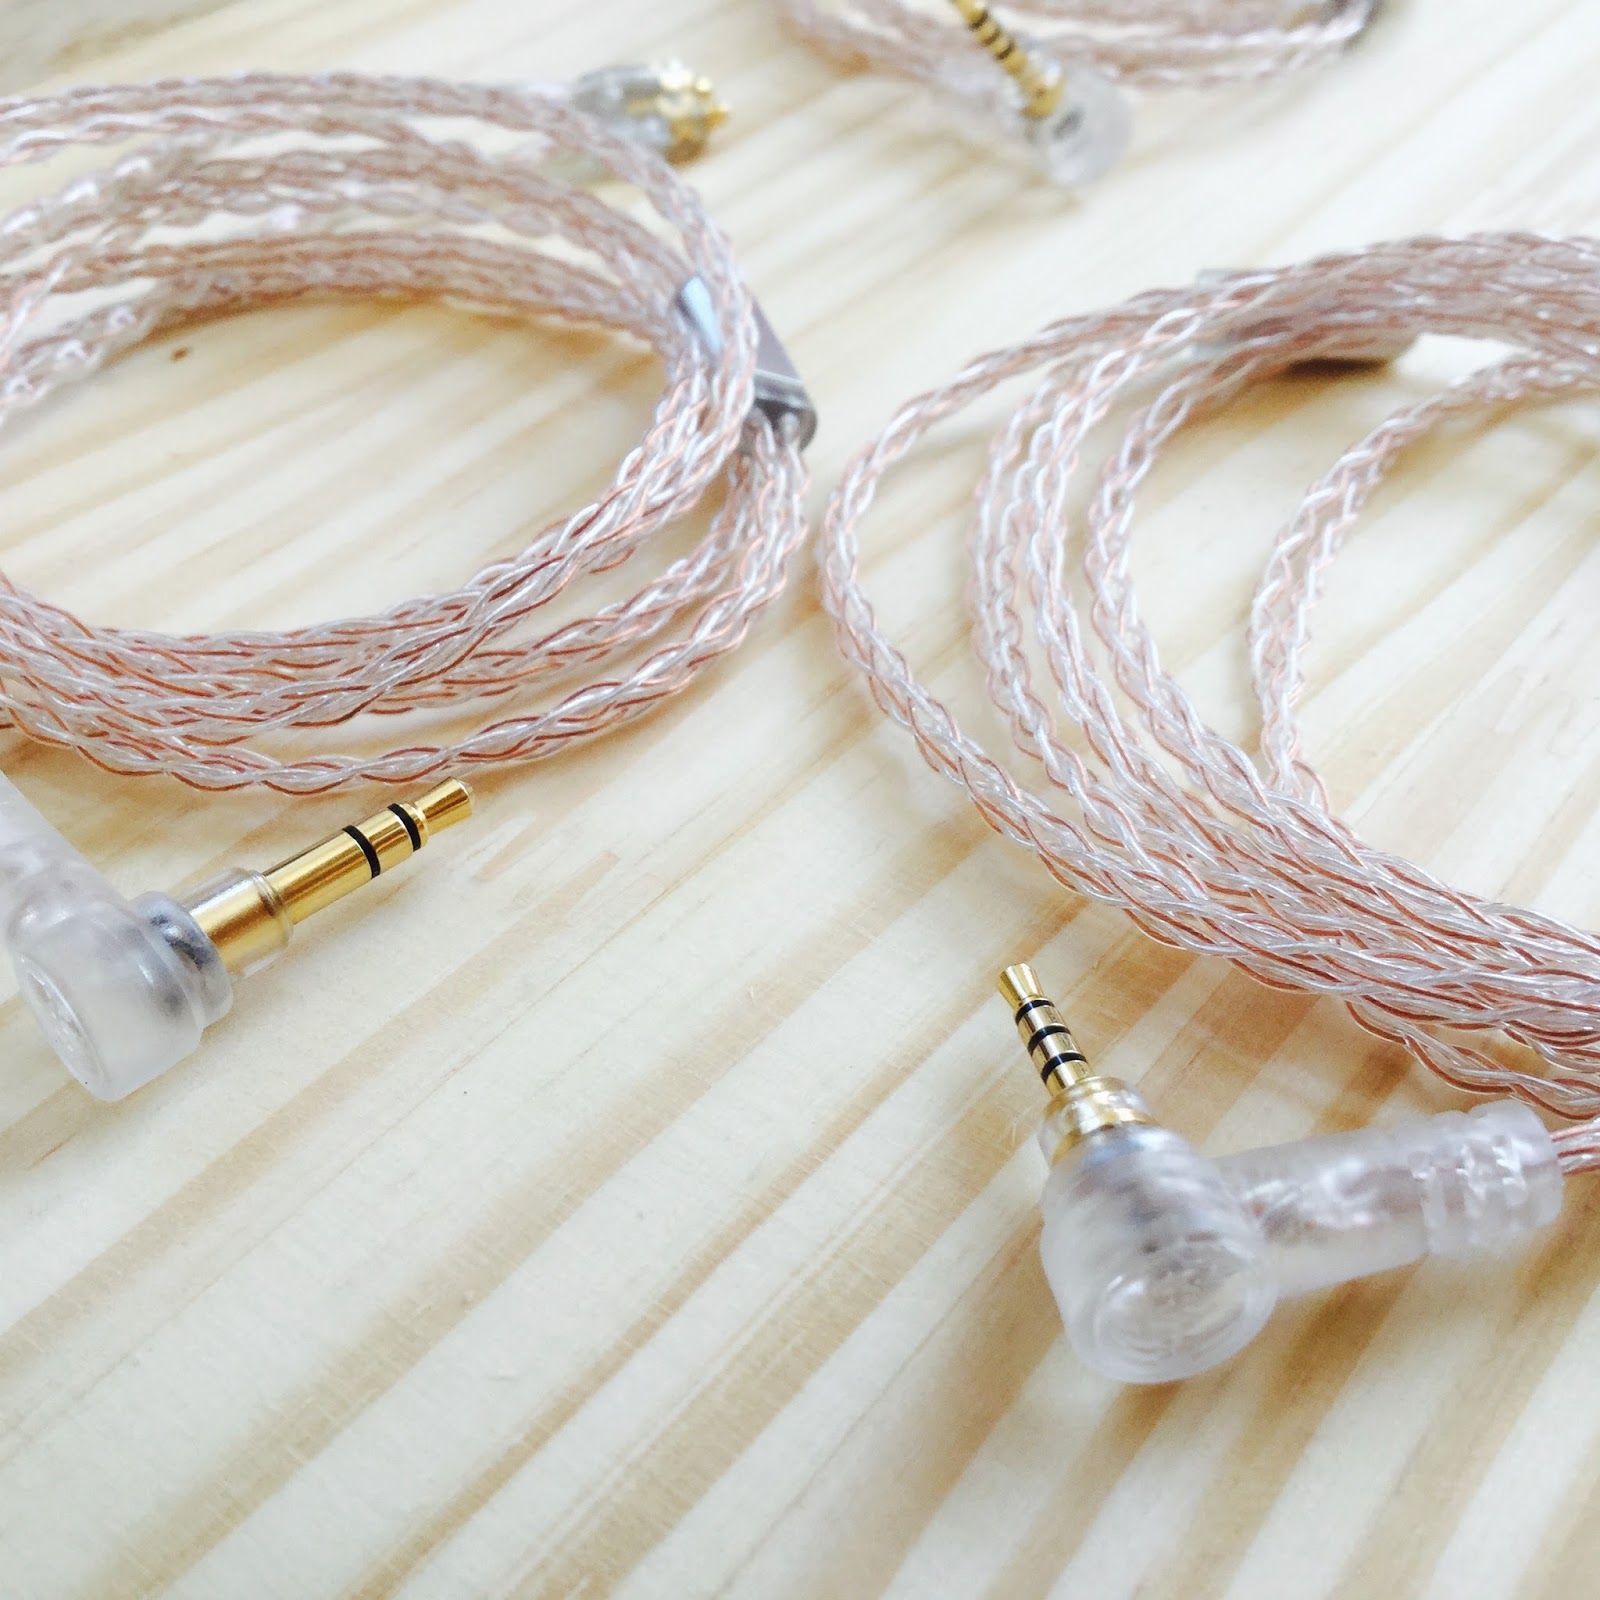 New ALO Audio Reference 8 IEM cables -expatinjapan